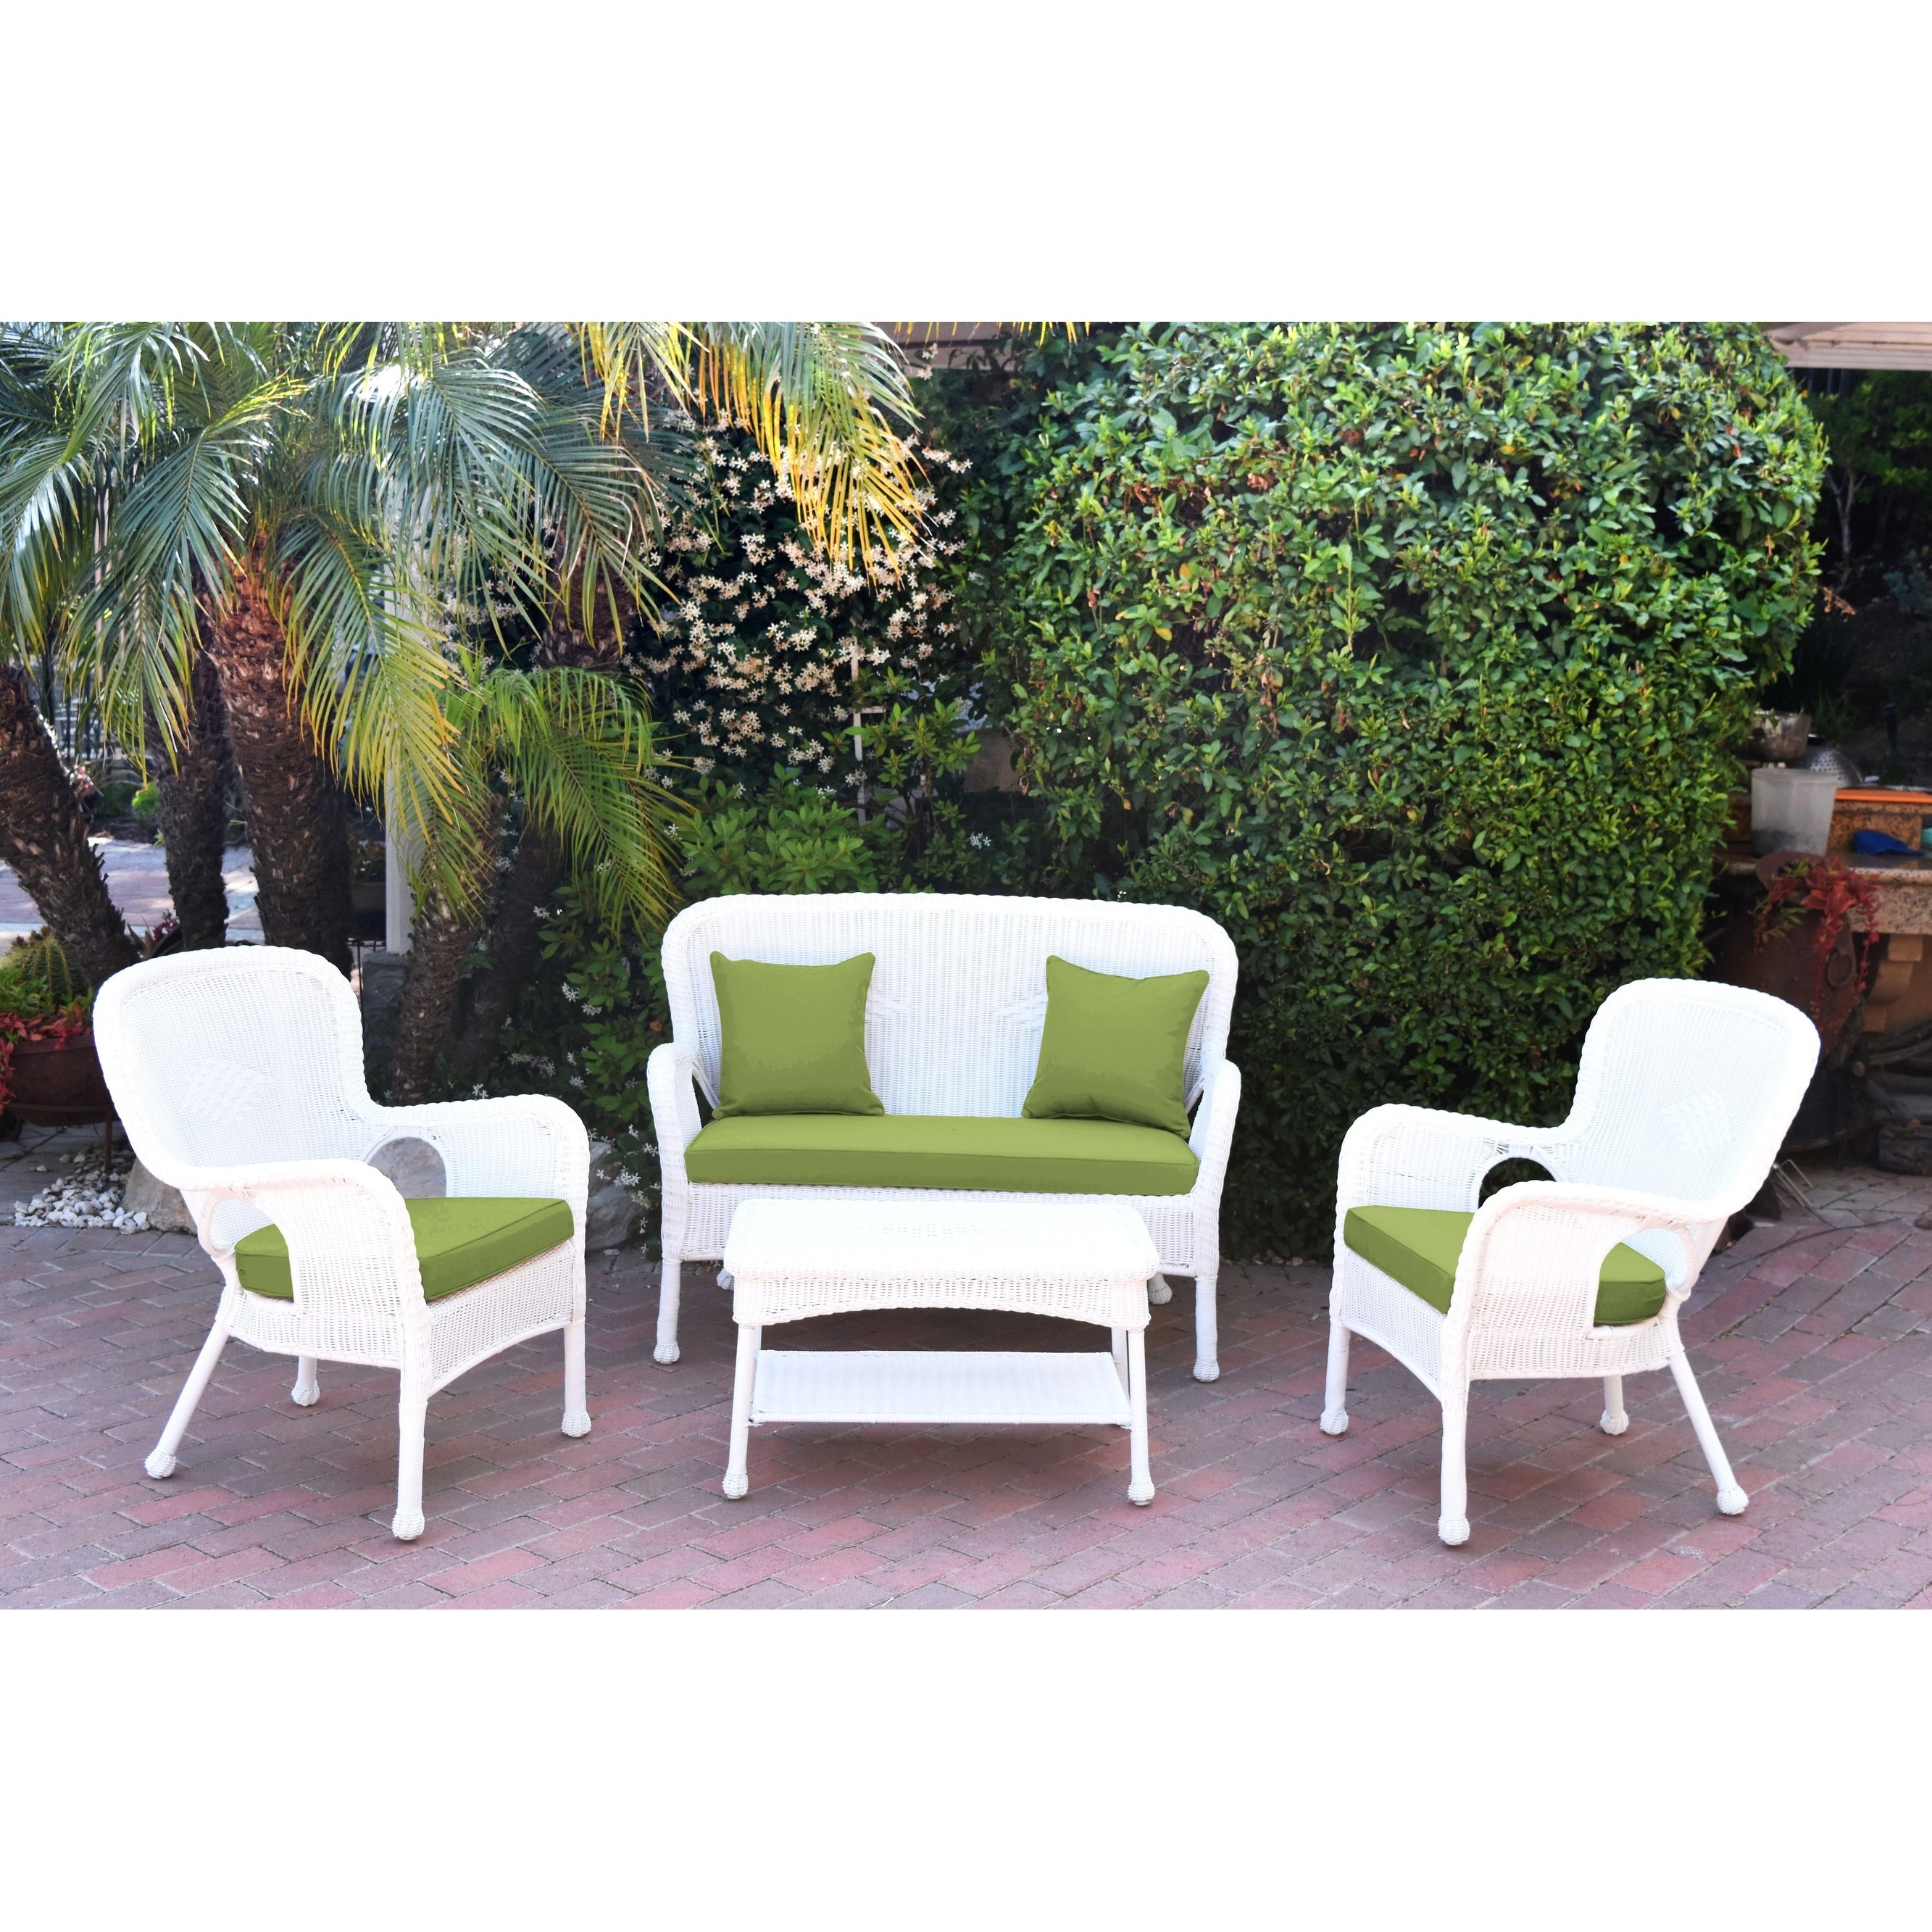 4pc Windsor White Wicker Conversation Set With Cushion